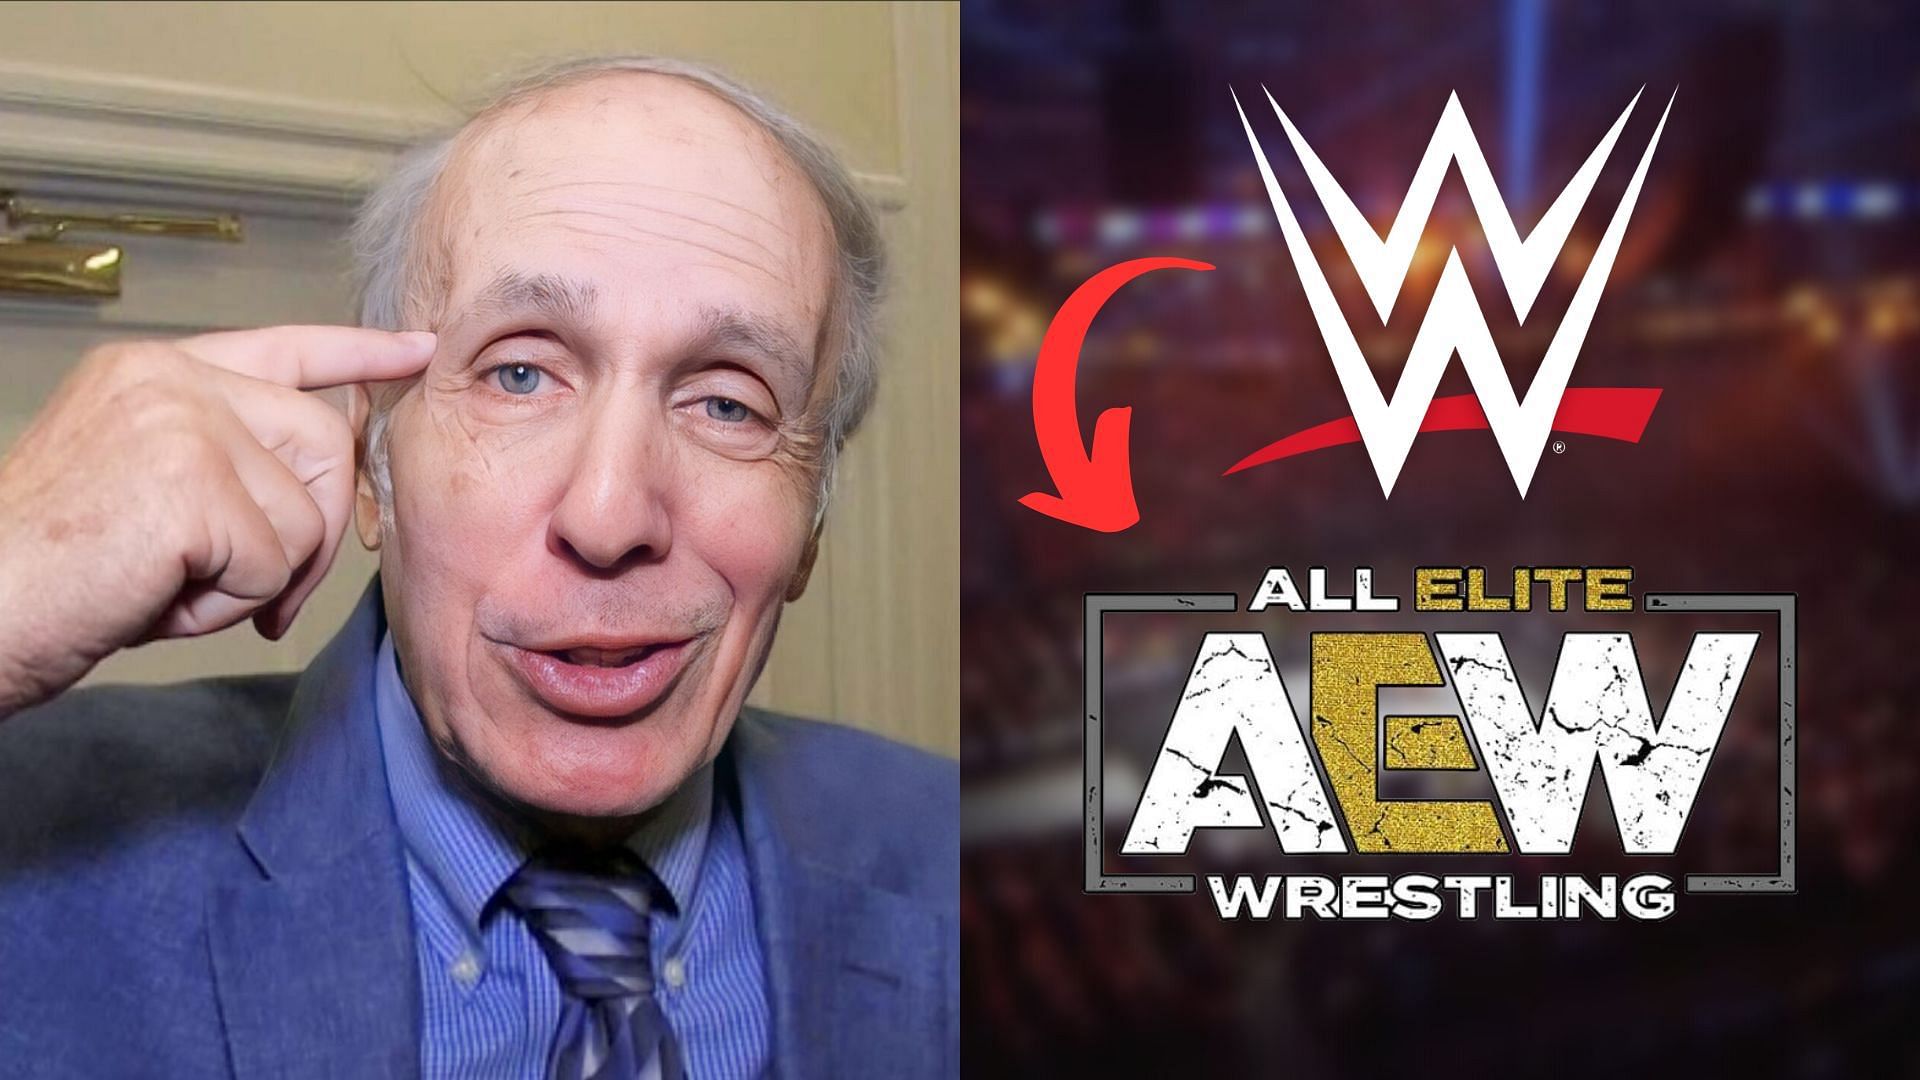 Bill Apter is not happy with how a current AEW star